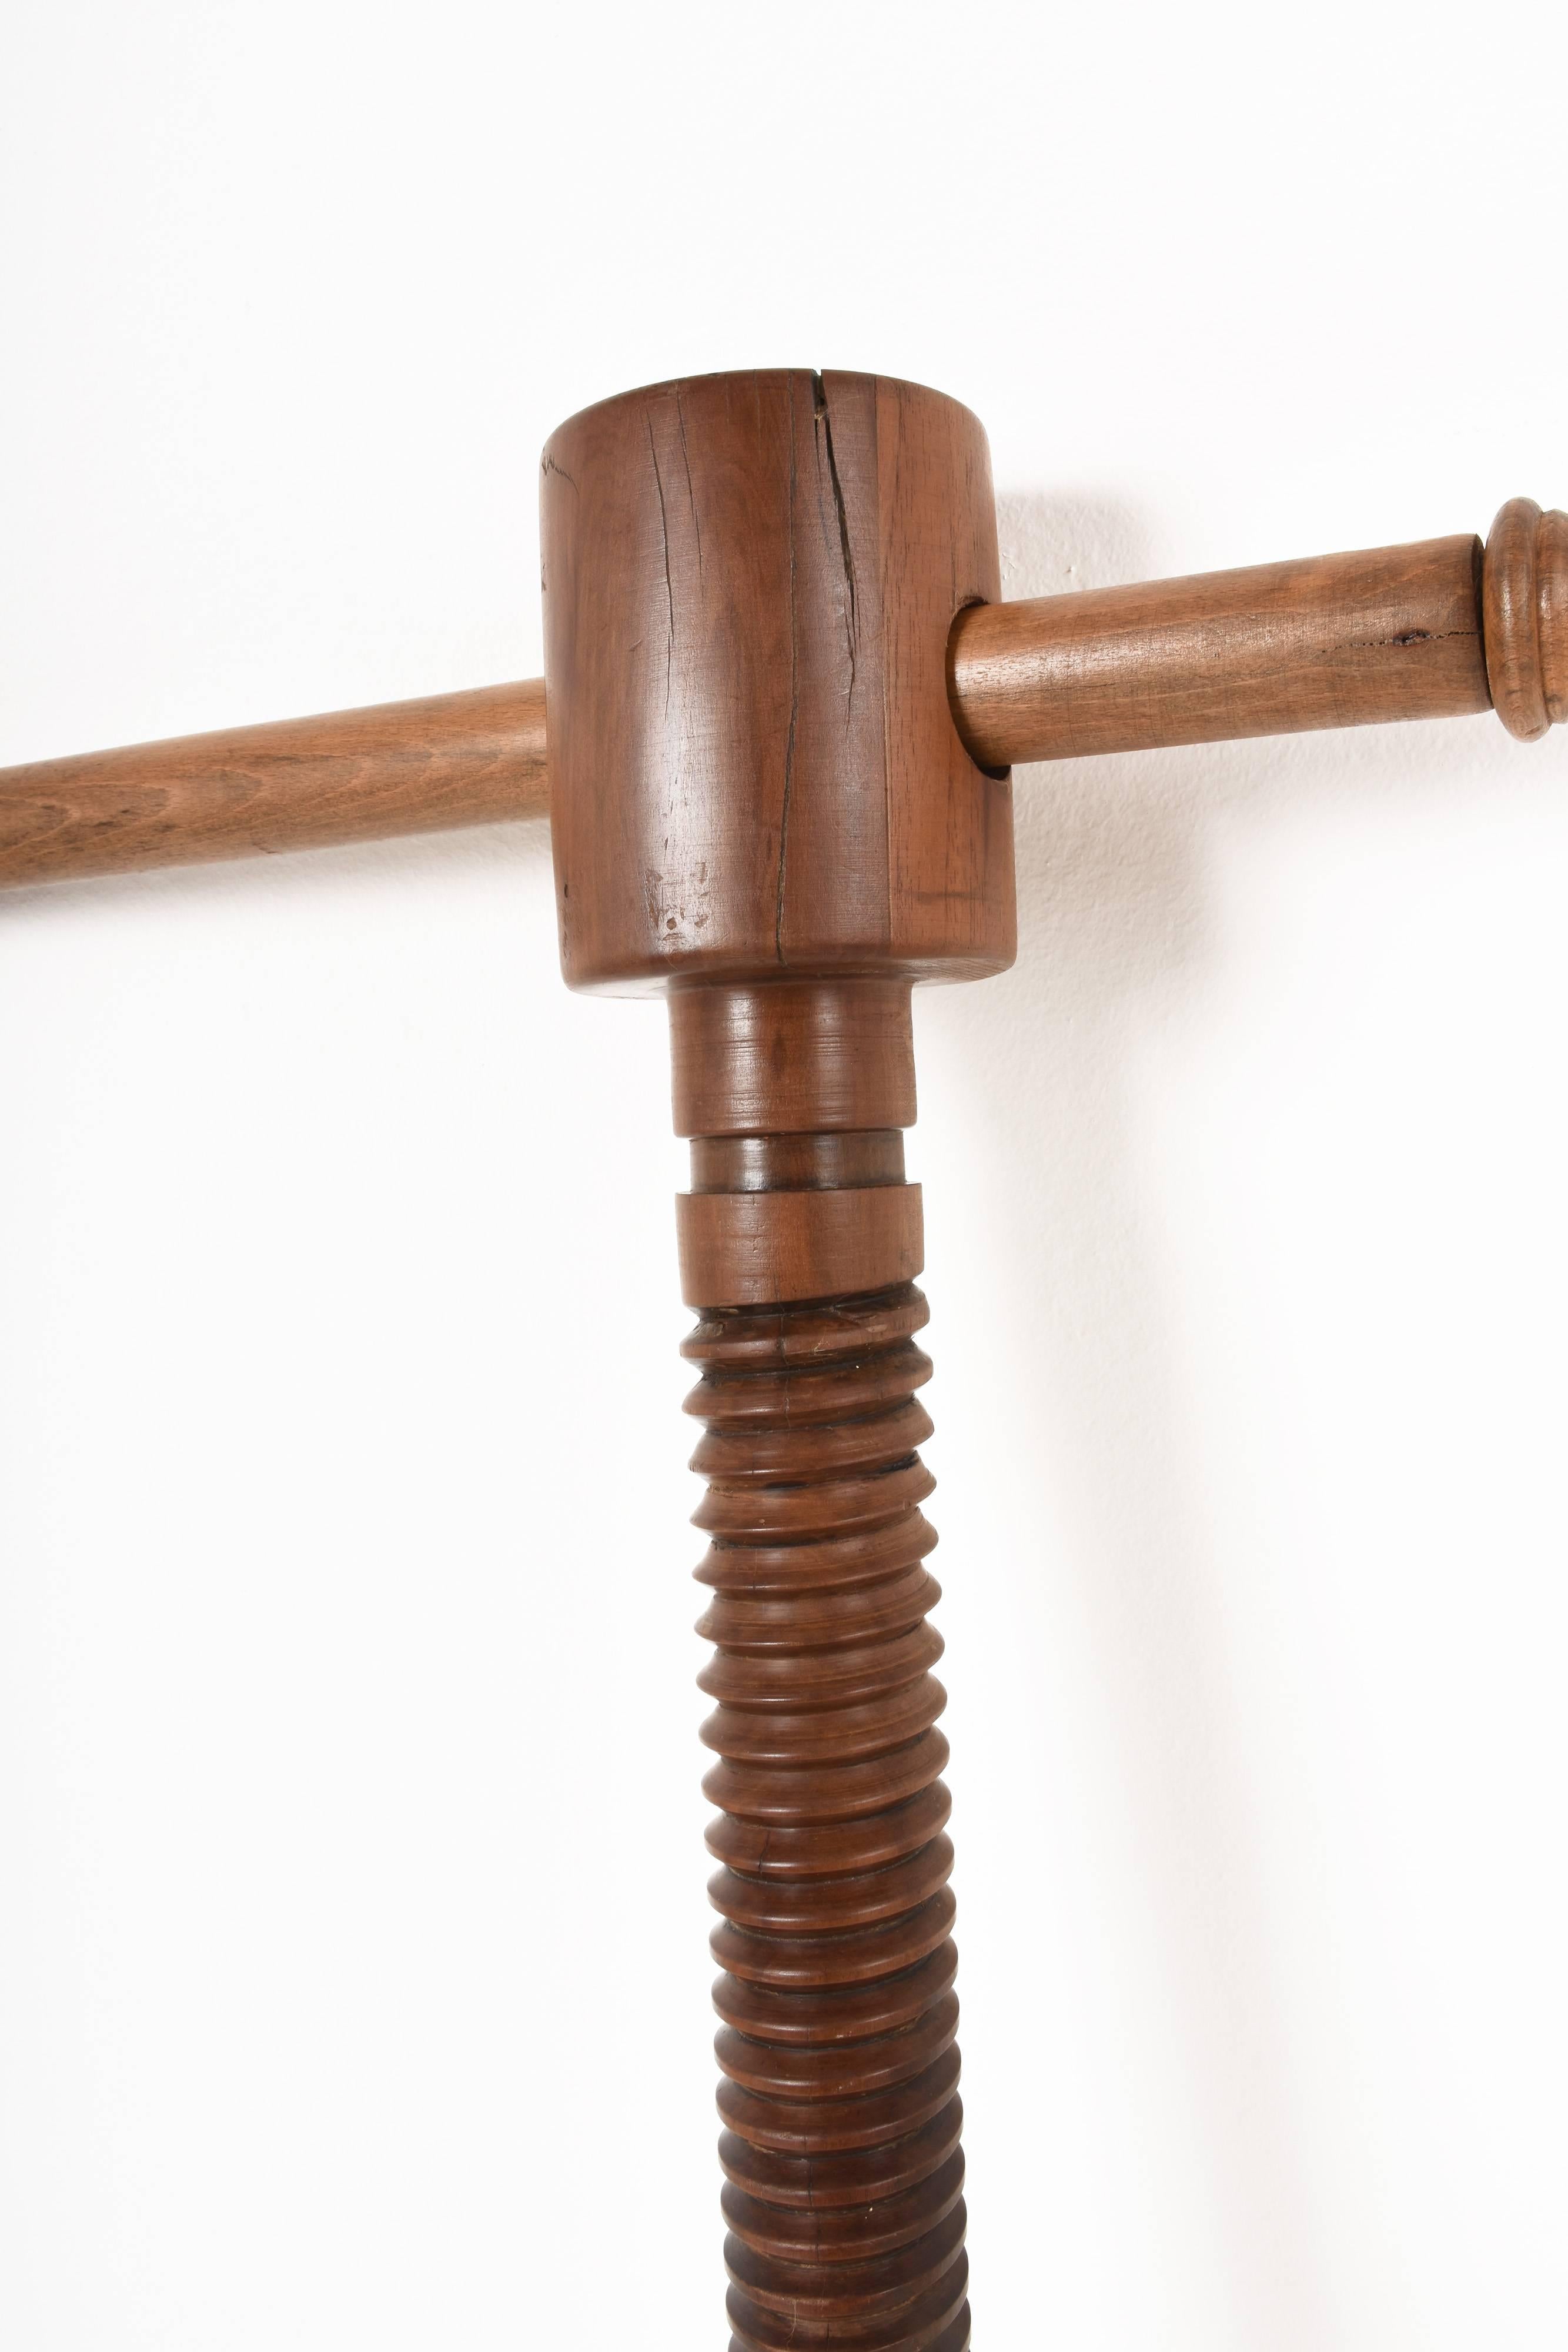 20th Century Walnut, Large Wooden Screw of a Wine Press, a Wooden Sculpture, Italy 1900s For Sale